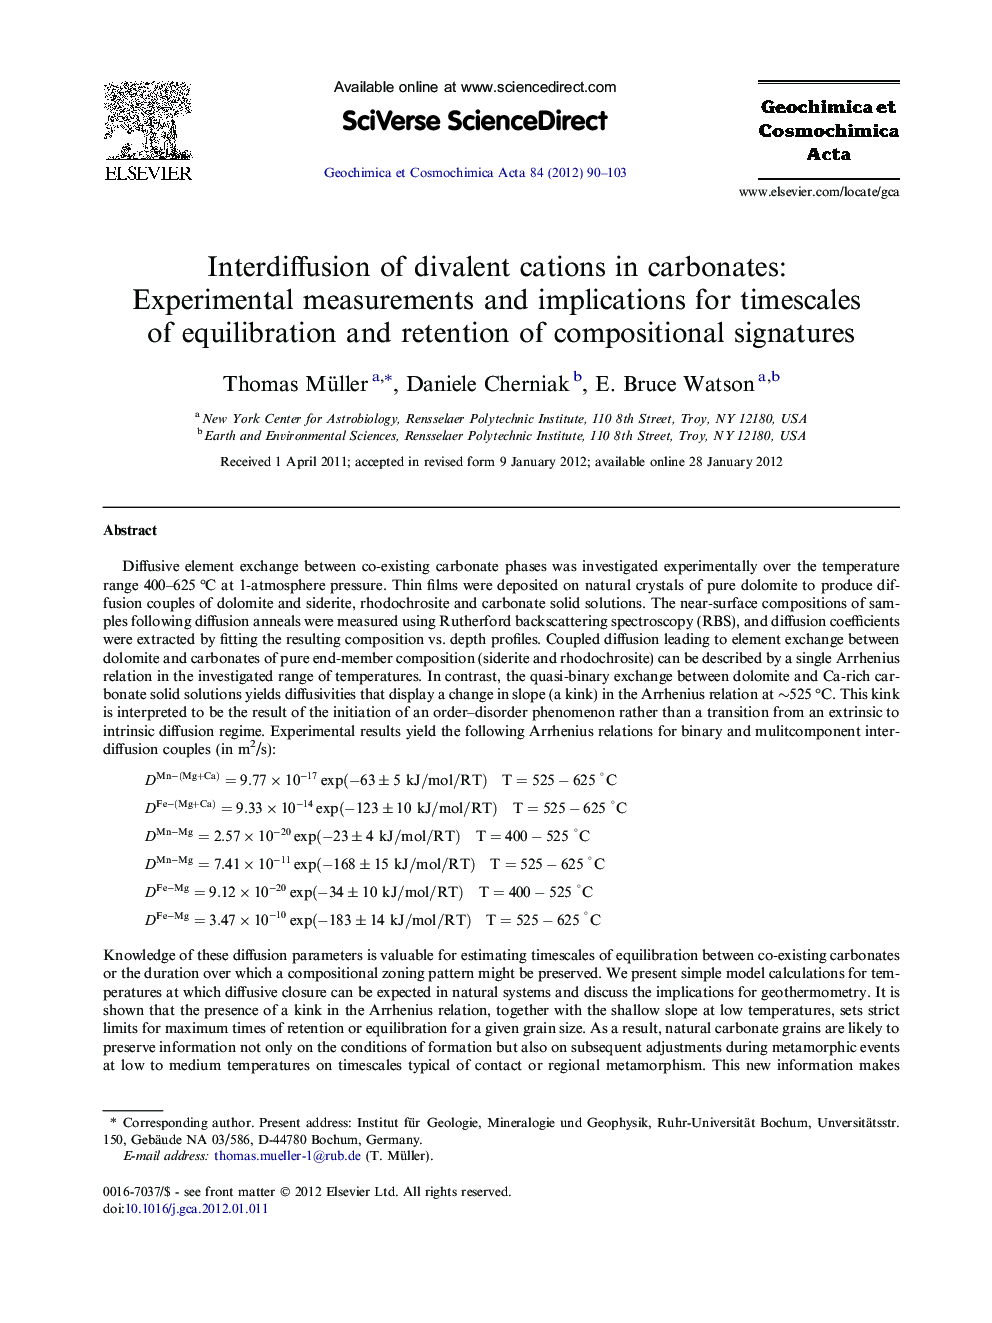 Interdiffusion of divalent cations in carbonates: Experimental measurements and implications for timescales of equilibration and retention of compositional signatures